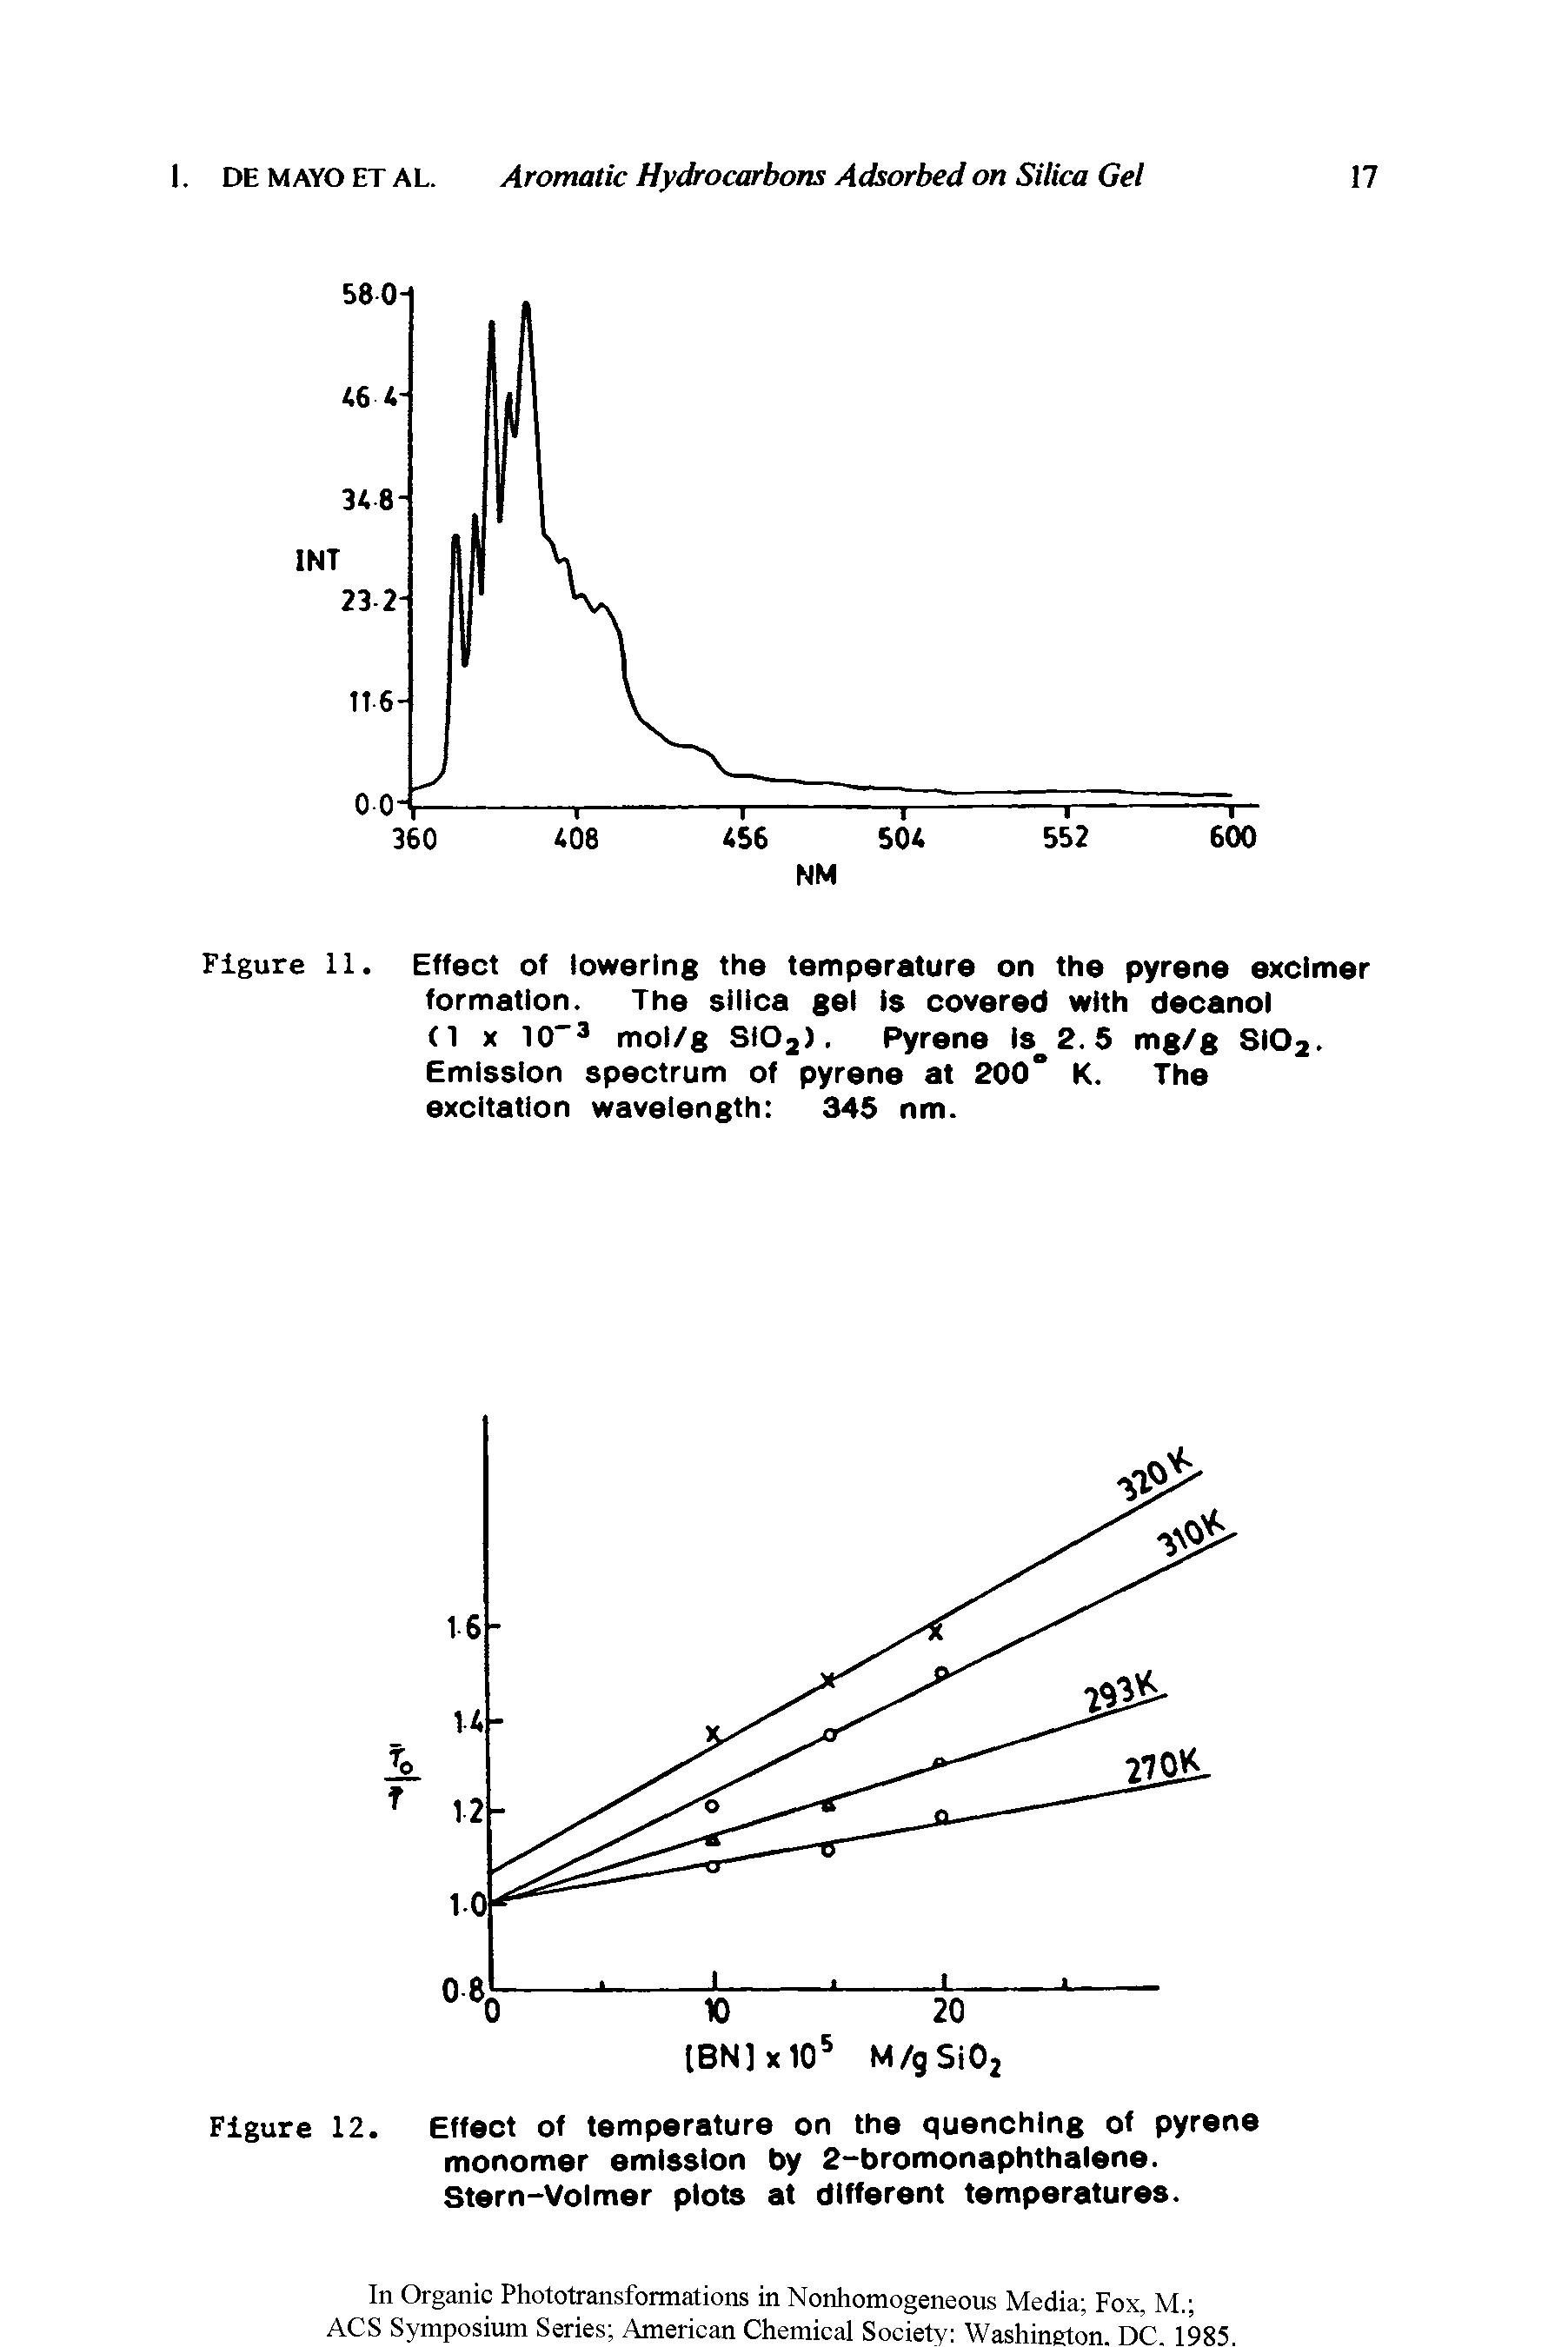 Figure 11. Effect of lowering the temperature on the pyrene excimer formation. The silica gel is covered with decanol (1 x 10"3 mol/g SI02). Pyrene iSo 2. 5 mg/g Si02. Emission spectrum of pyrene at 200° K. The excitation wavelength 345 nm.